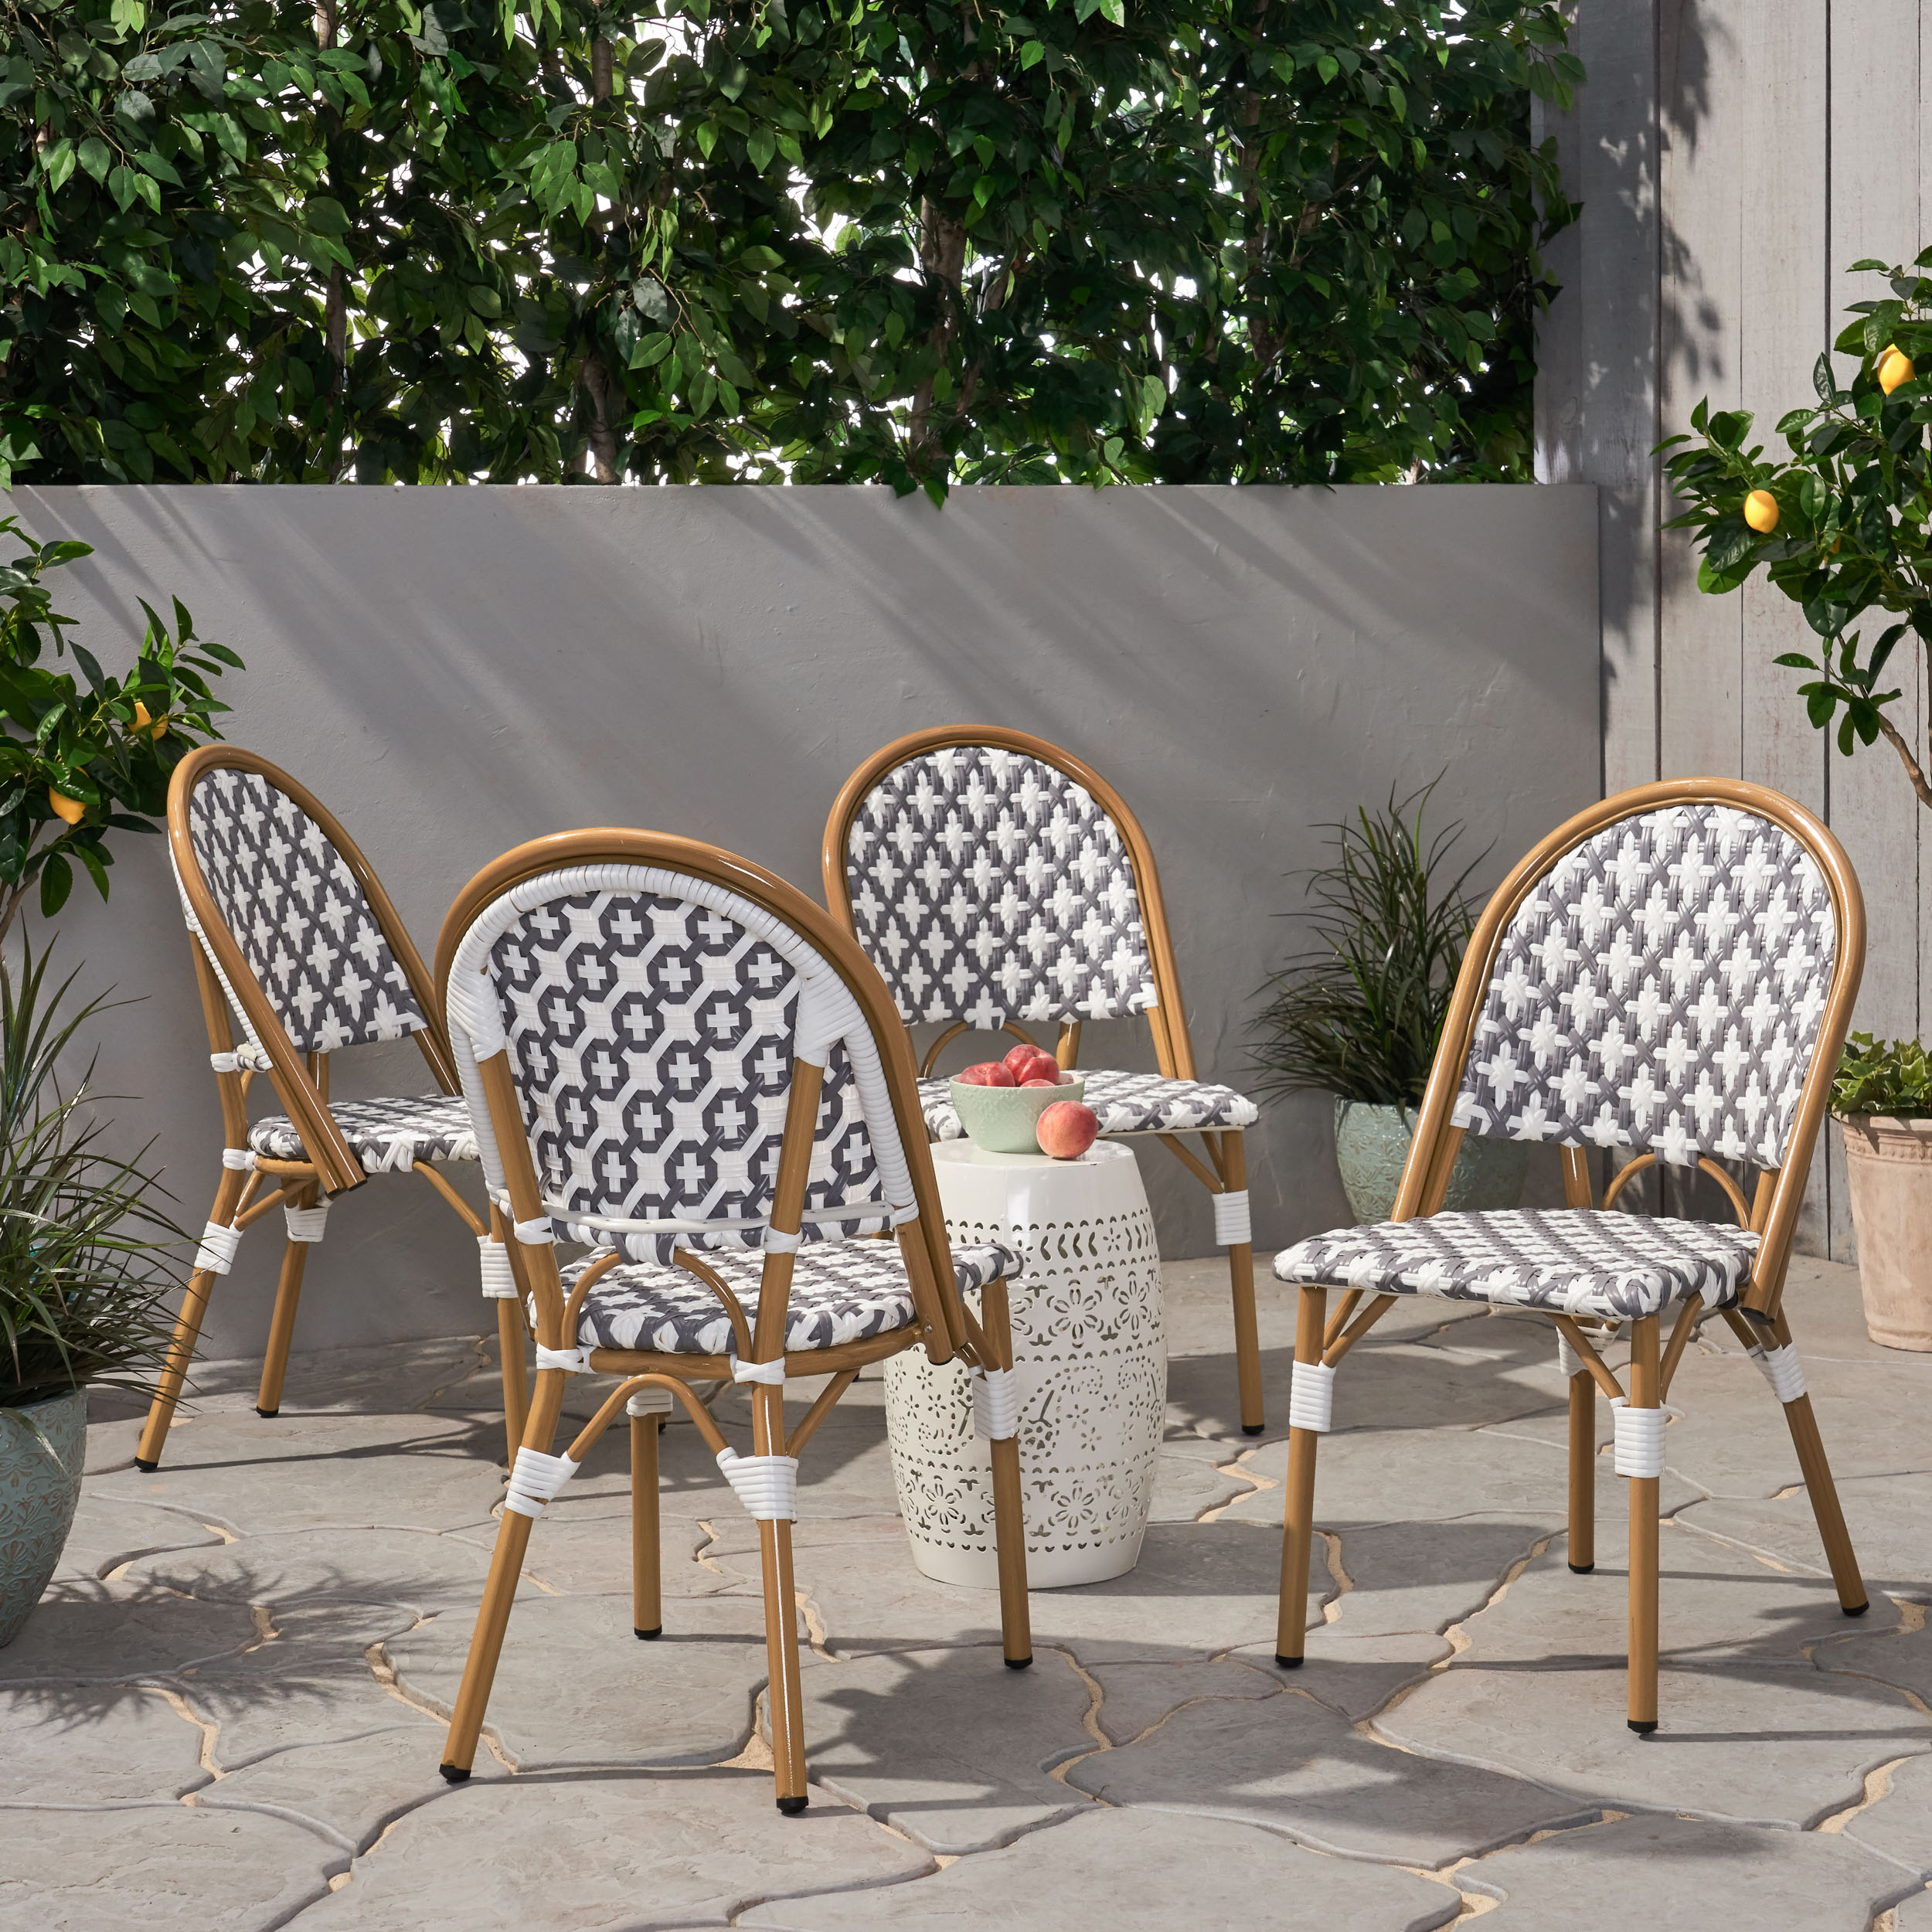 Jordy Outdoor French Bistro Chair , Set of 4, Gray, White, and Bamboo Finish - image 2 of 7